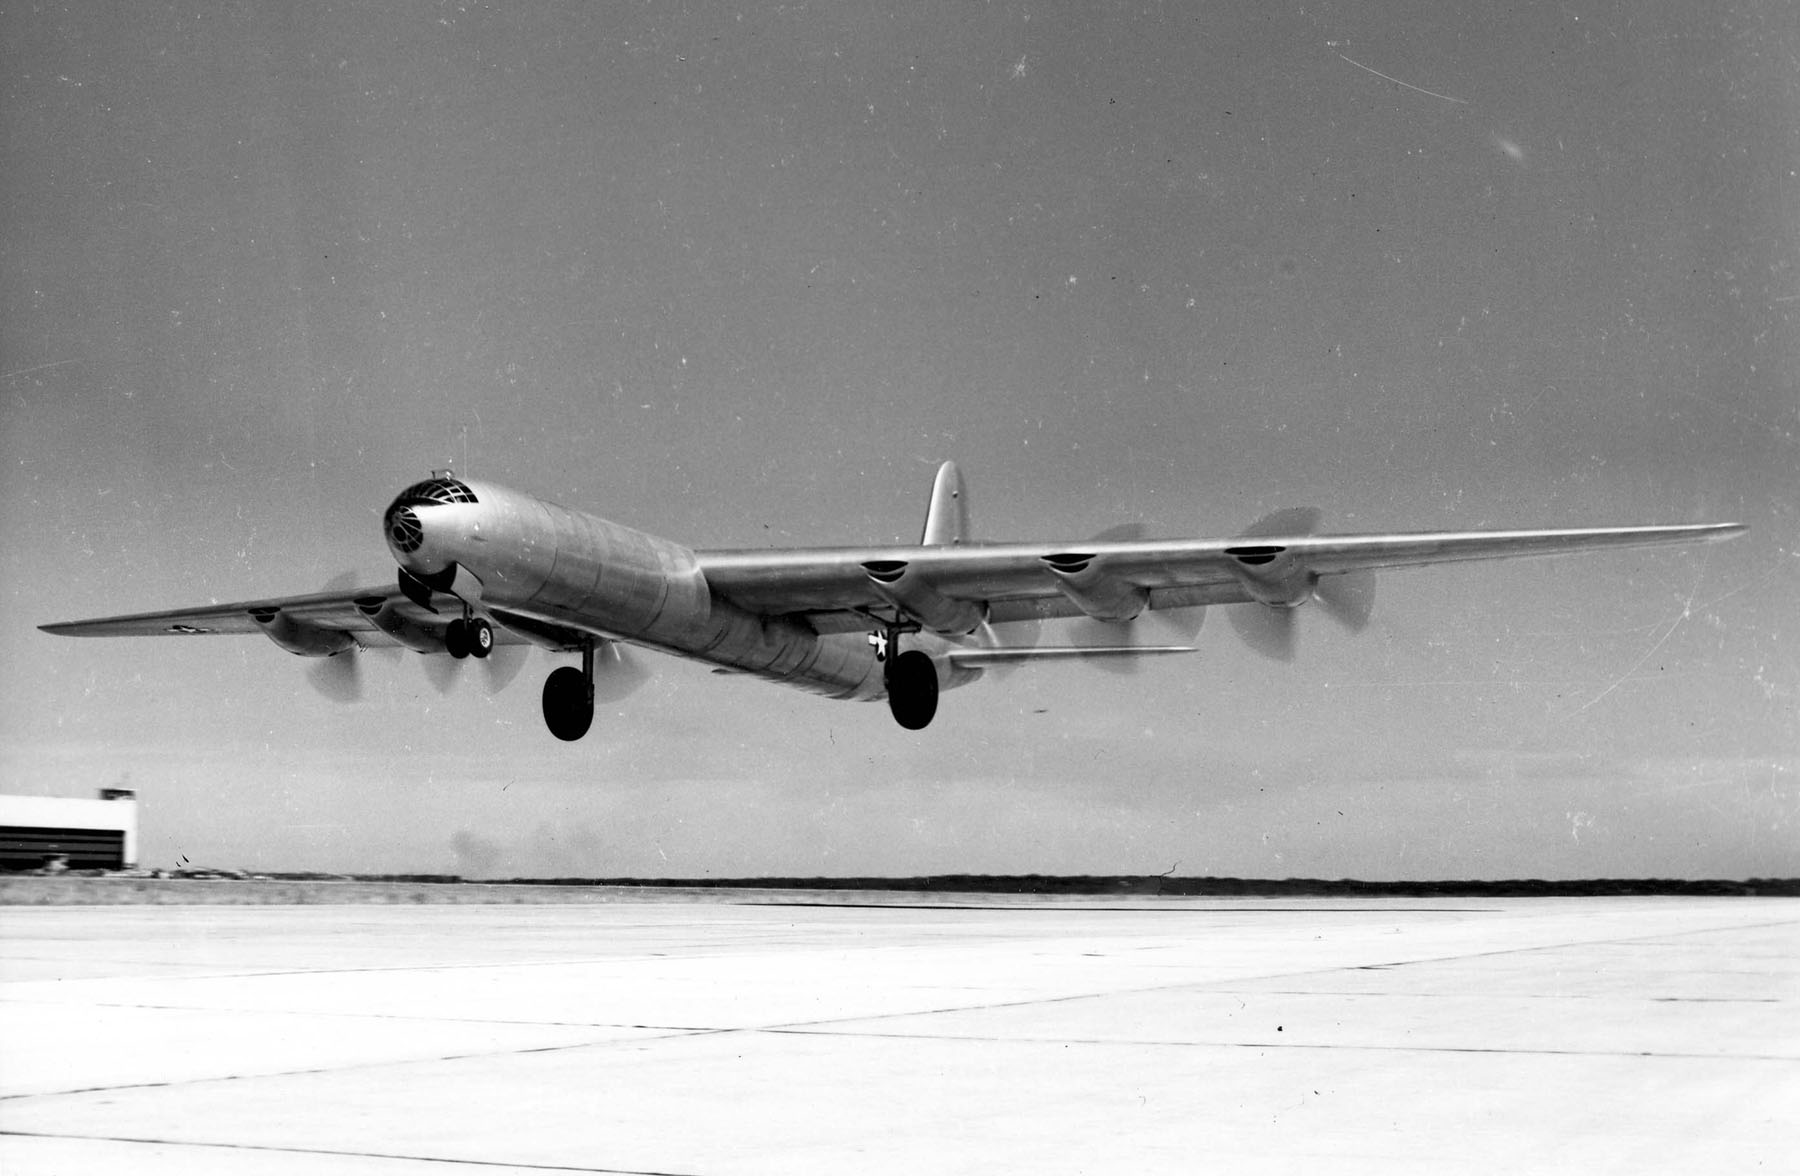 The prototype Convair XB-36, 42-13570, lifts off the runway at Fort Worth, Texas. (U.S. Air Force) 